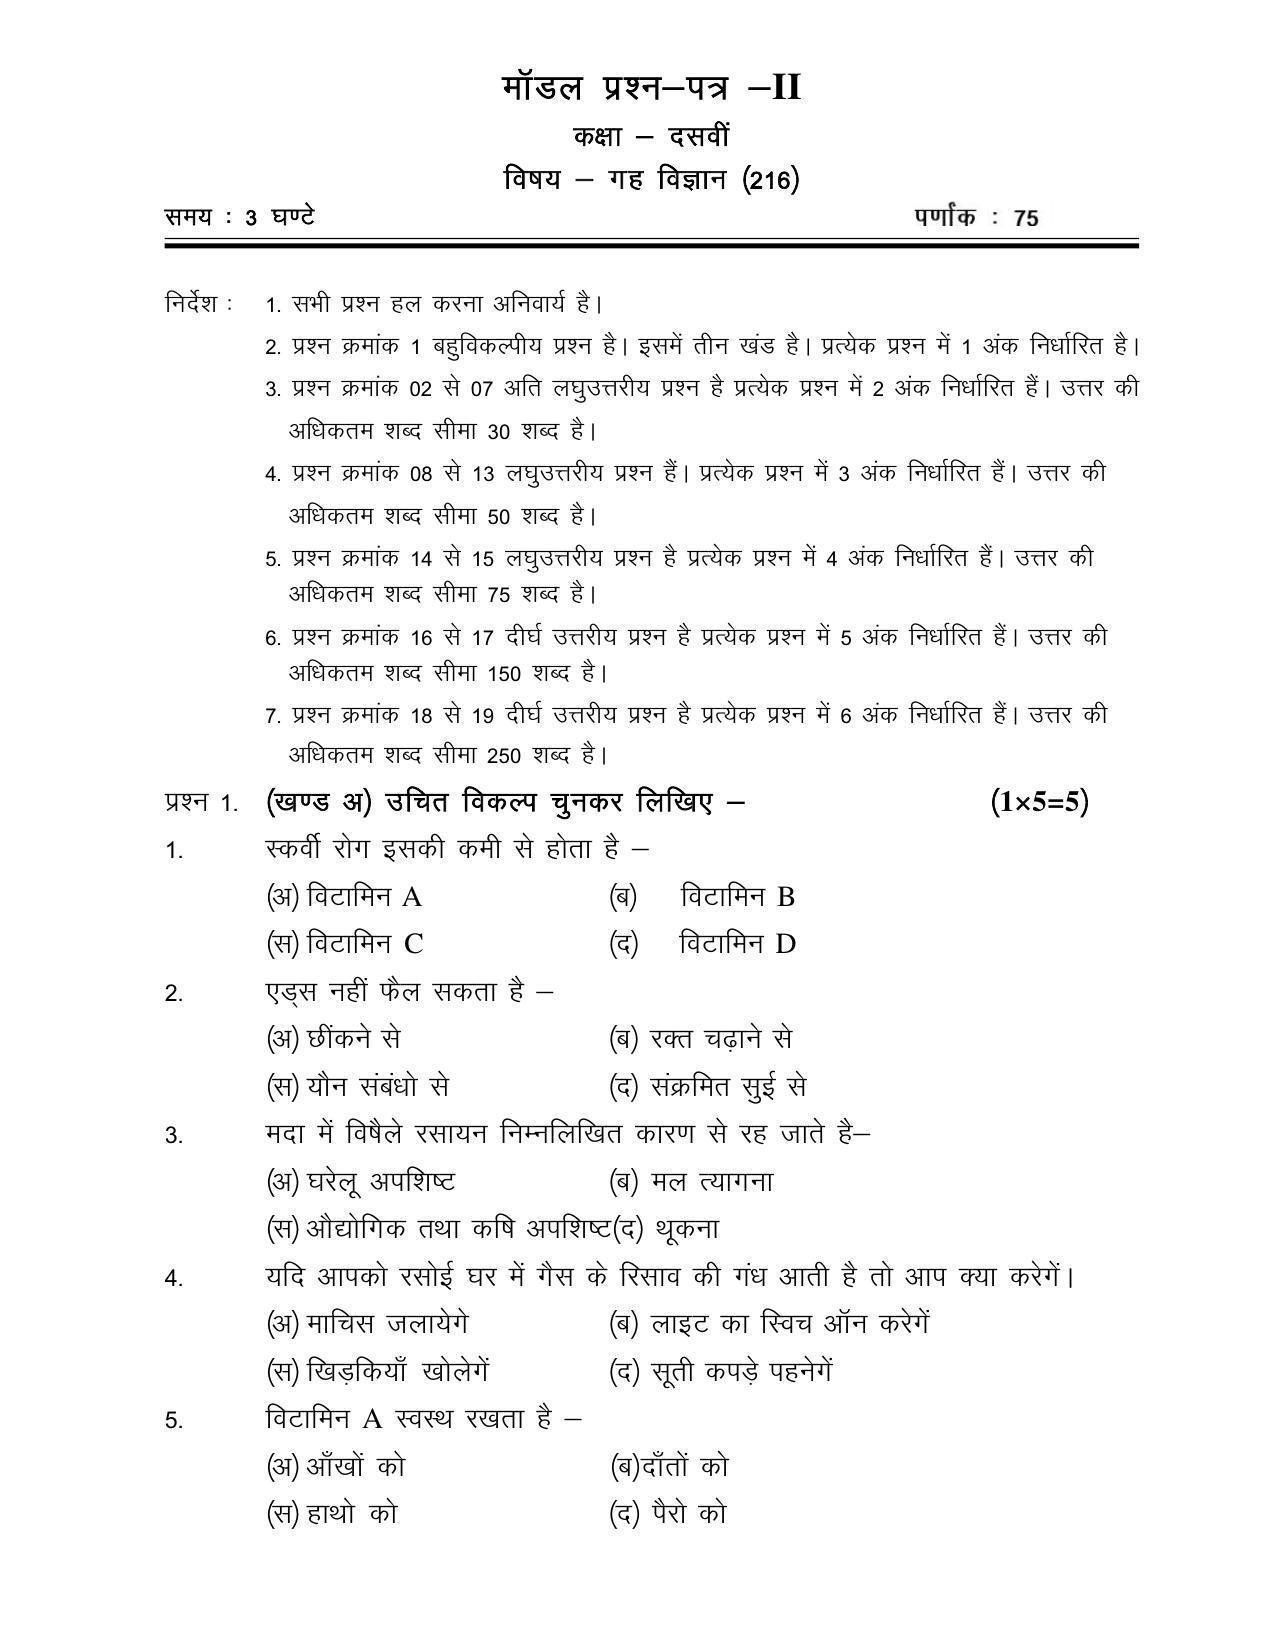 CGSOS Class 10th Model Question Paper - Home Science - II - Page 1